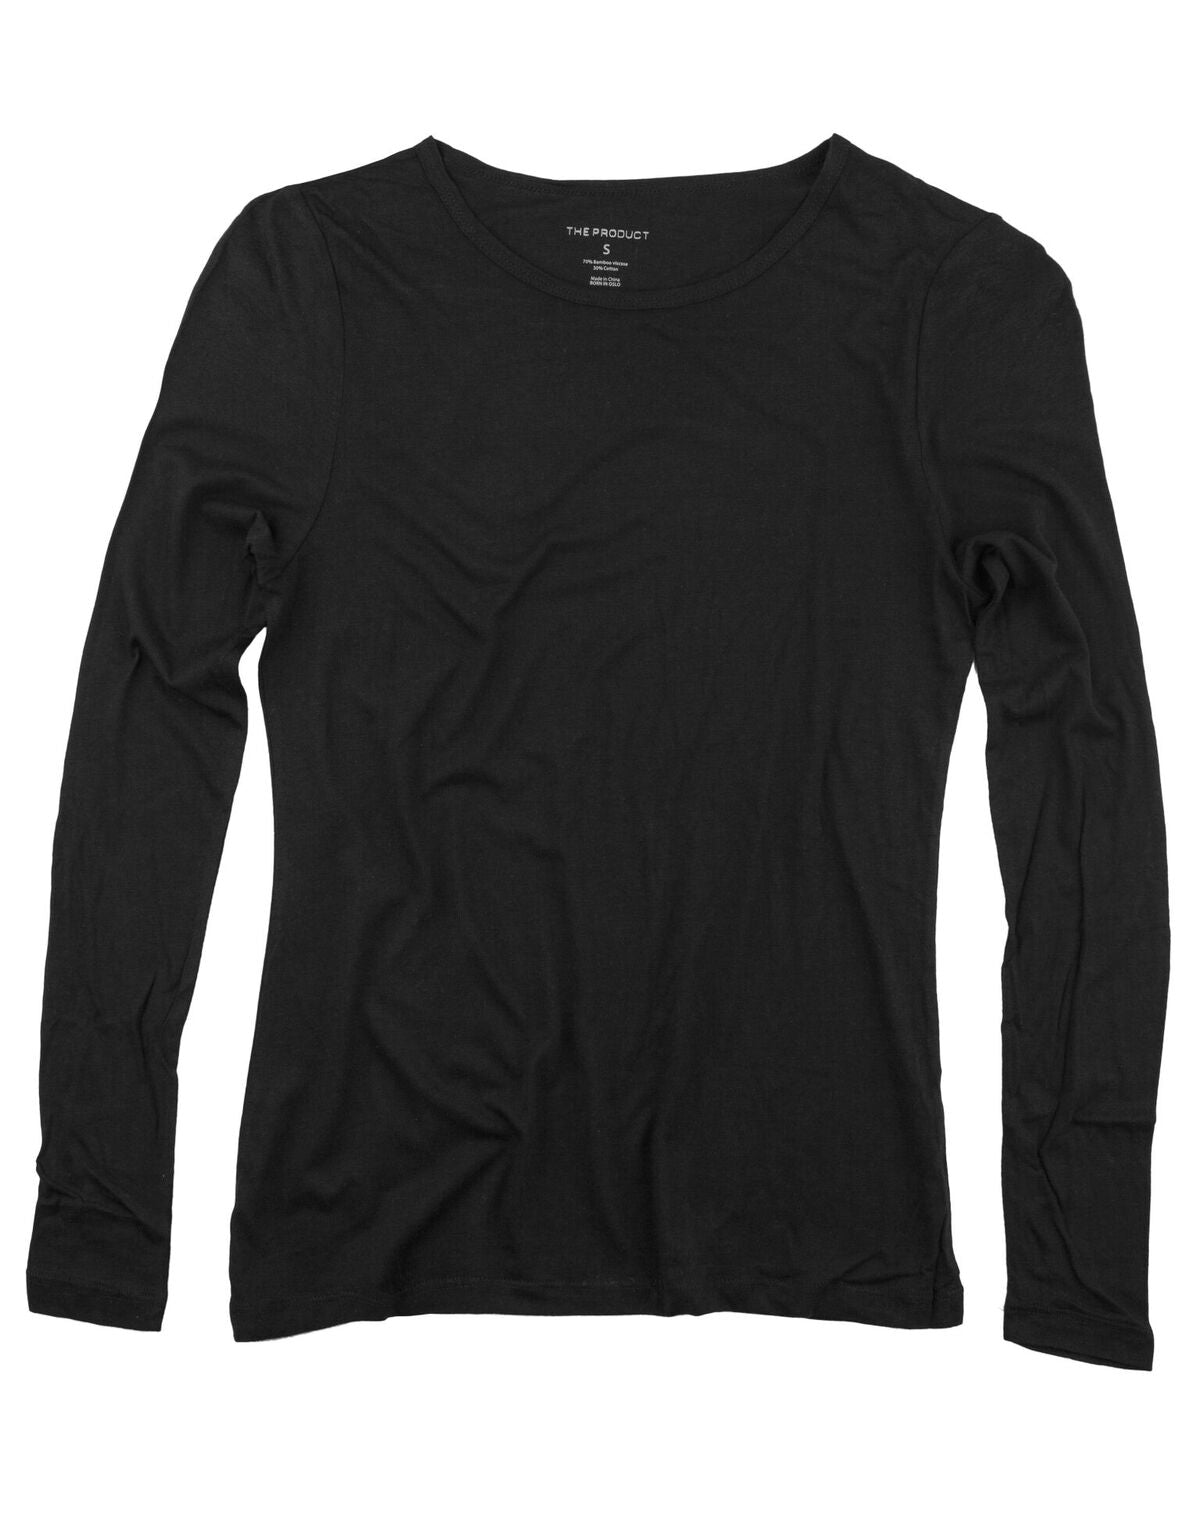 Women's Long Sleeve - Black - The Product - Gensere - VILLOID.no